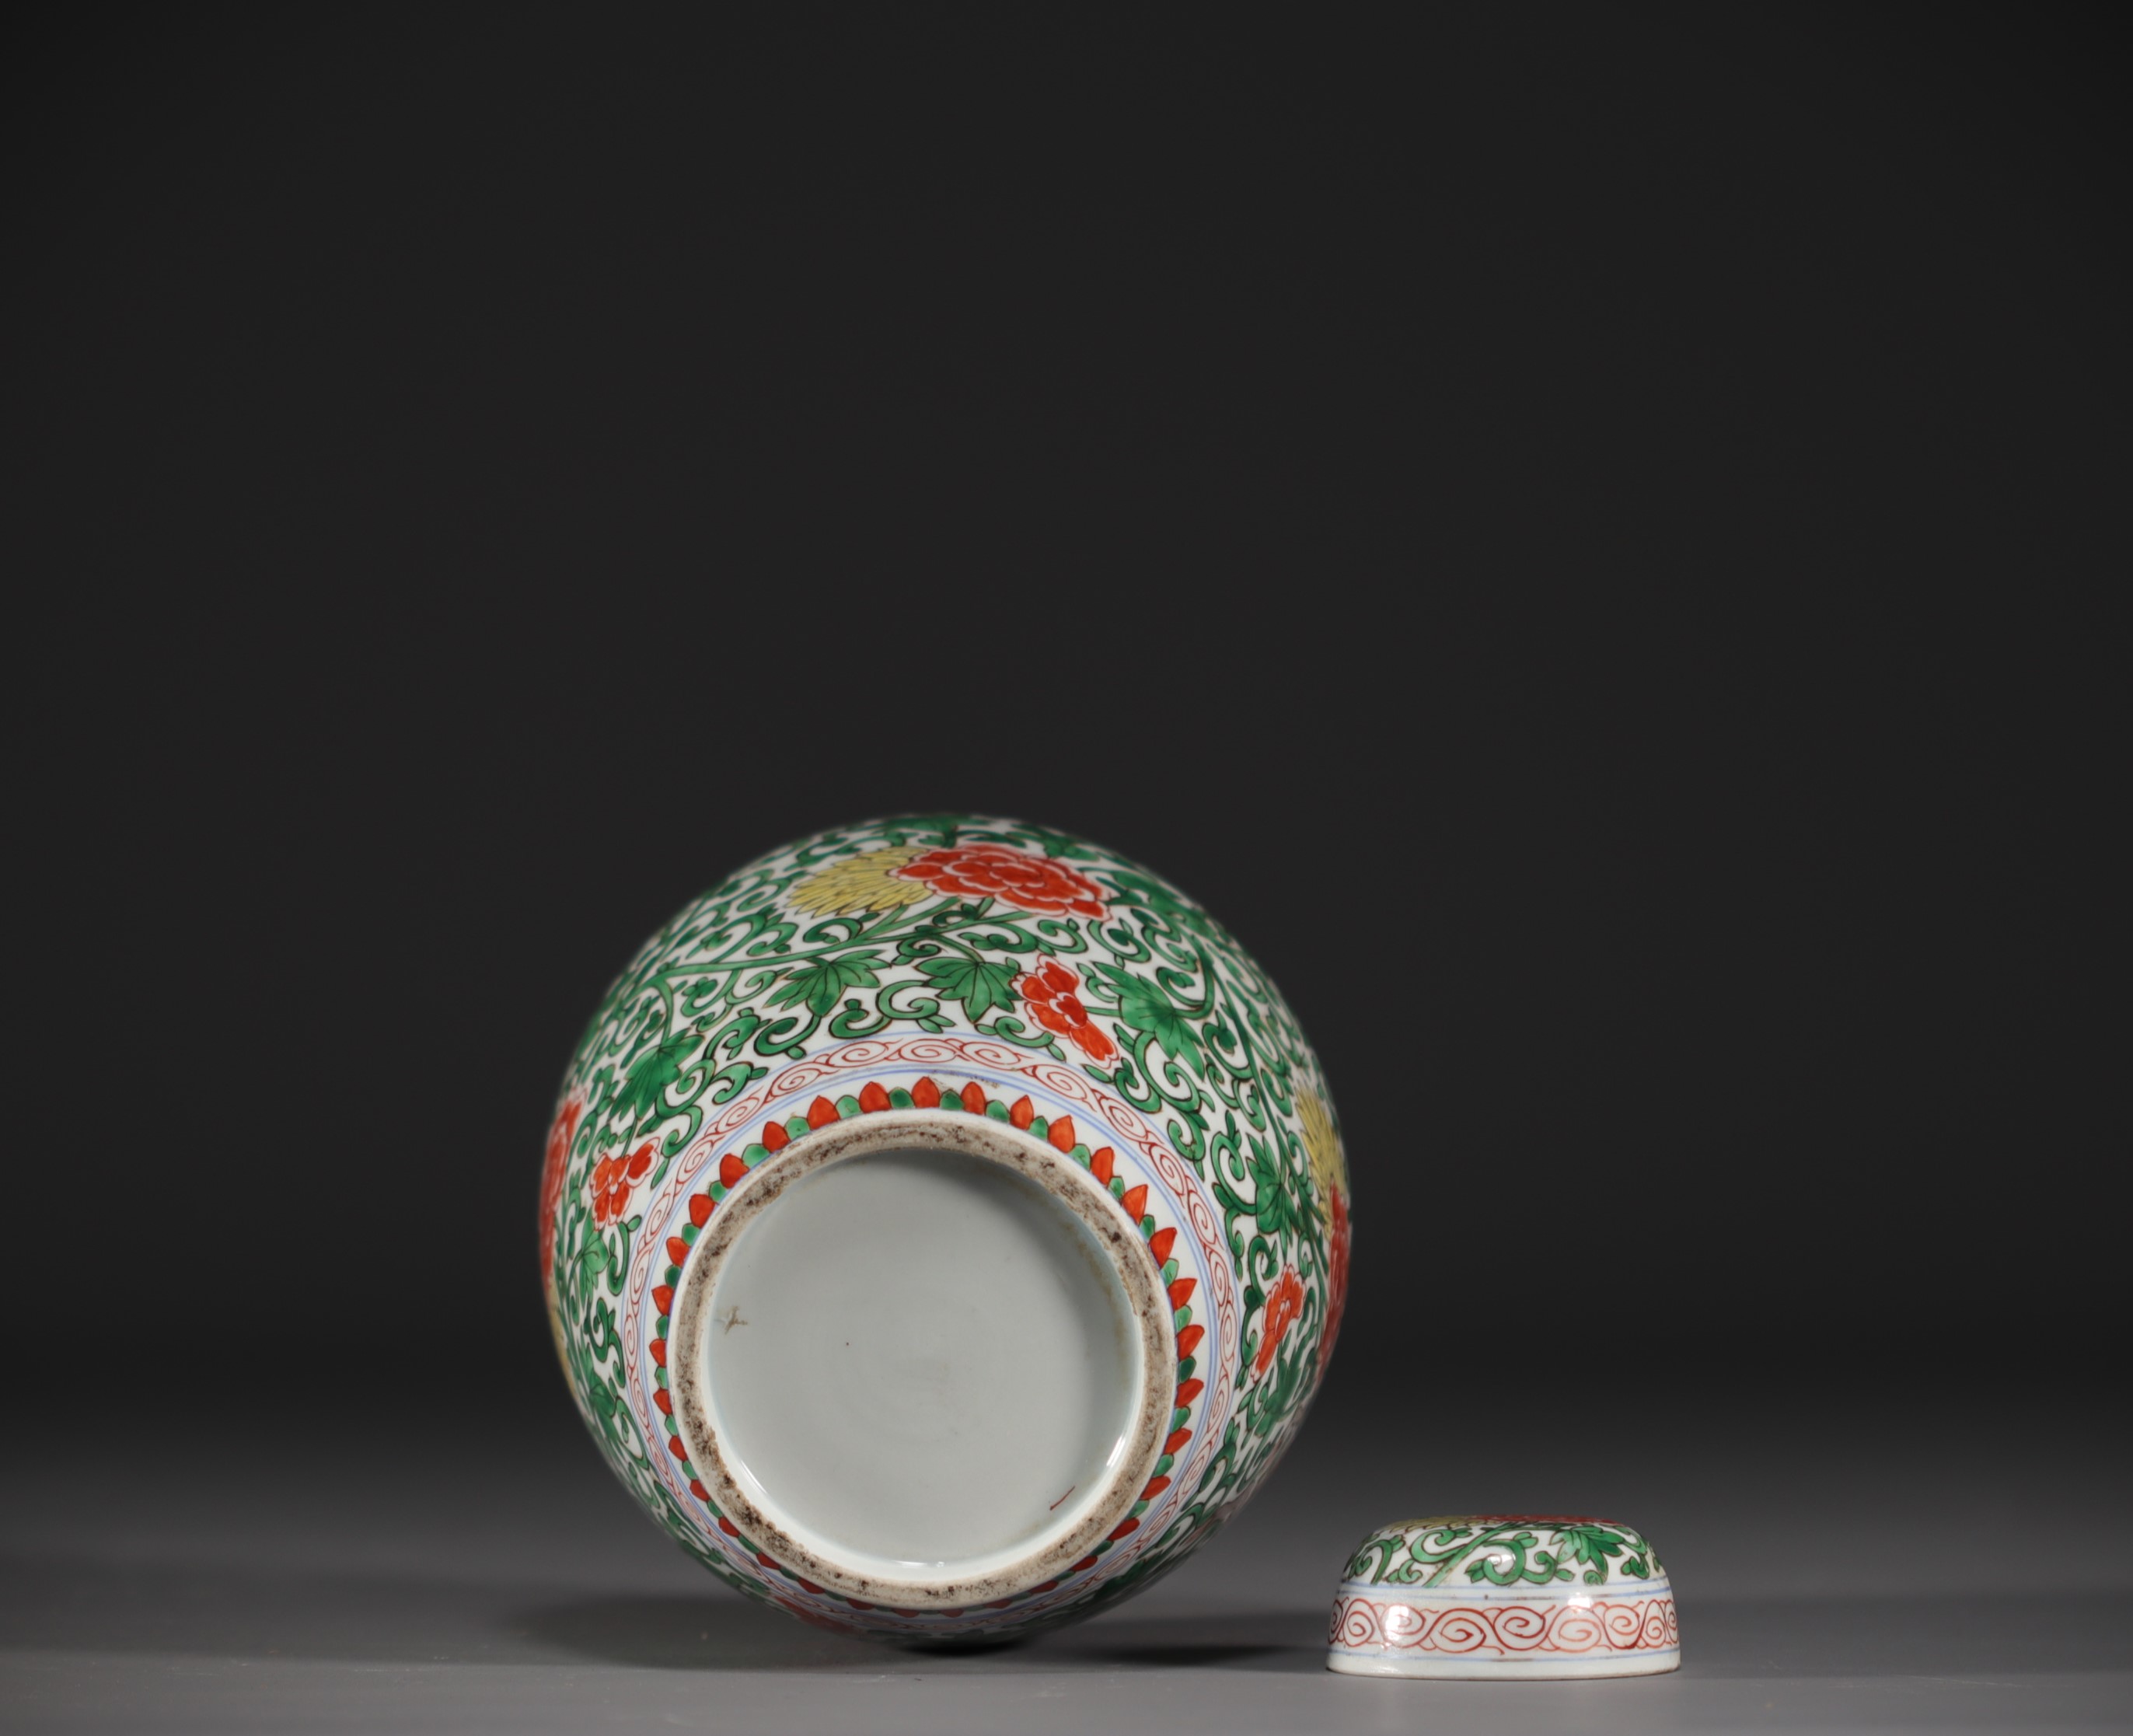 China - Porcelain ginger pot decorated with chimeras. - Image 4 of 4